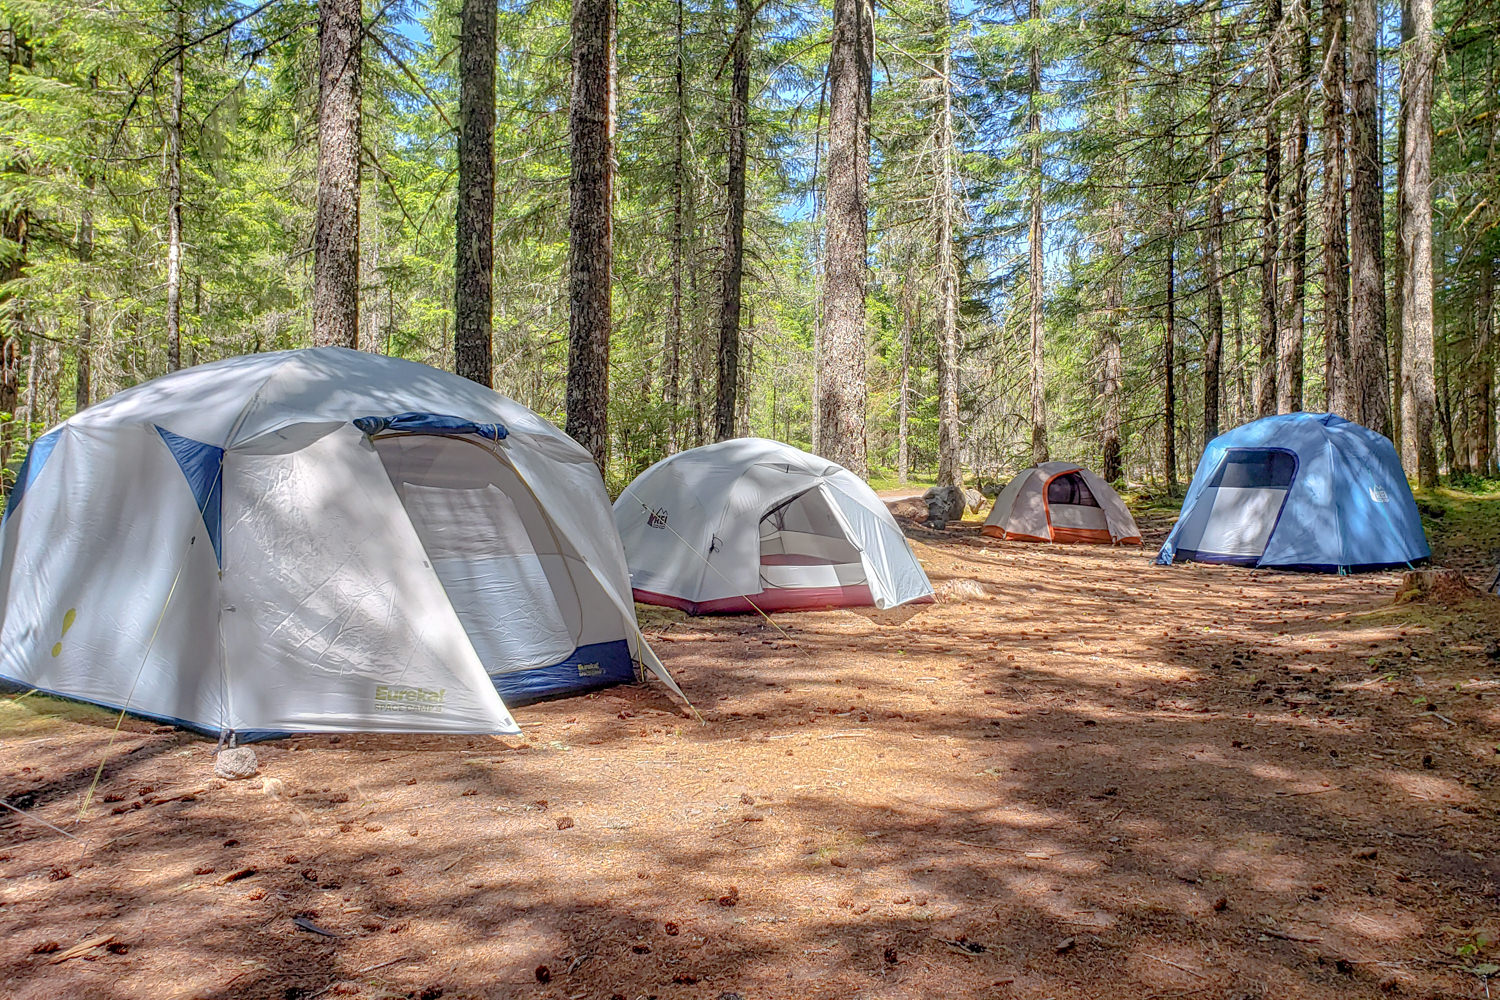 The Eureka Space Camp 4, REI Half Dome 4 Plus, REI Passage 3, and REI Grand Hut 4 tents in a forested campsite.